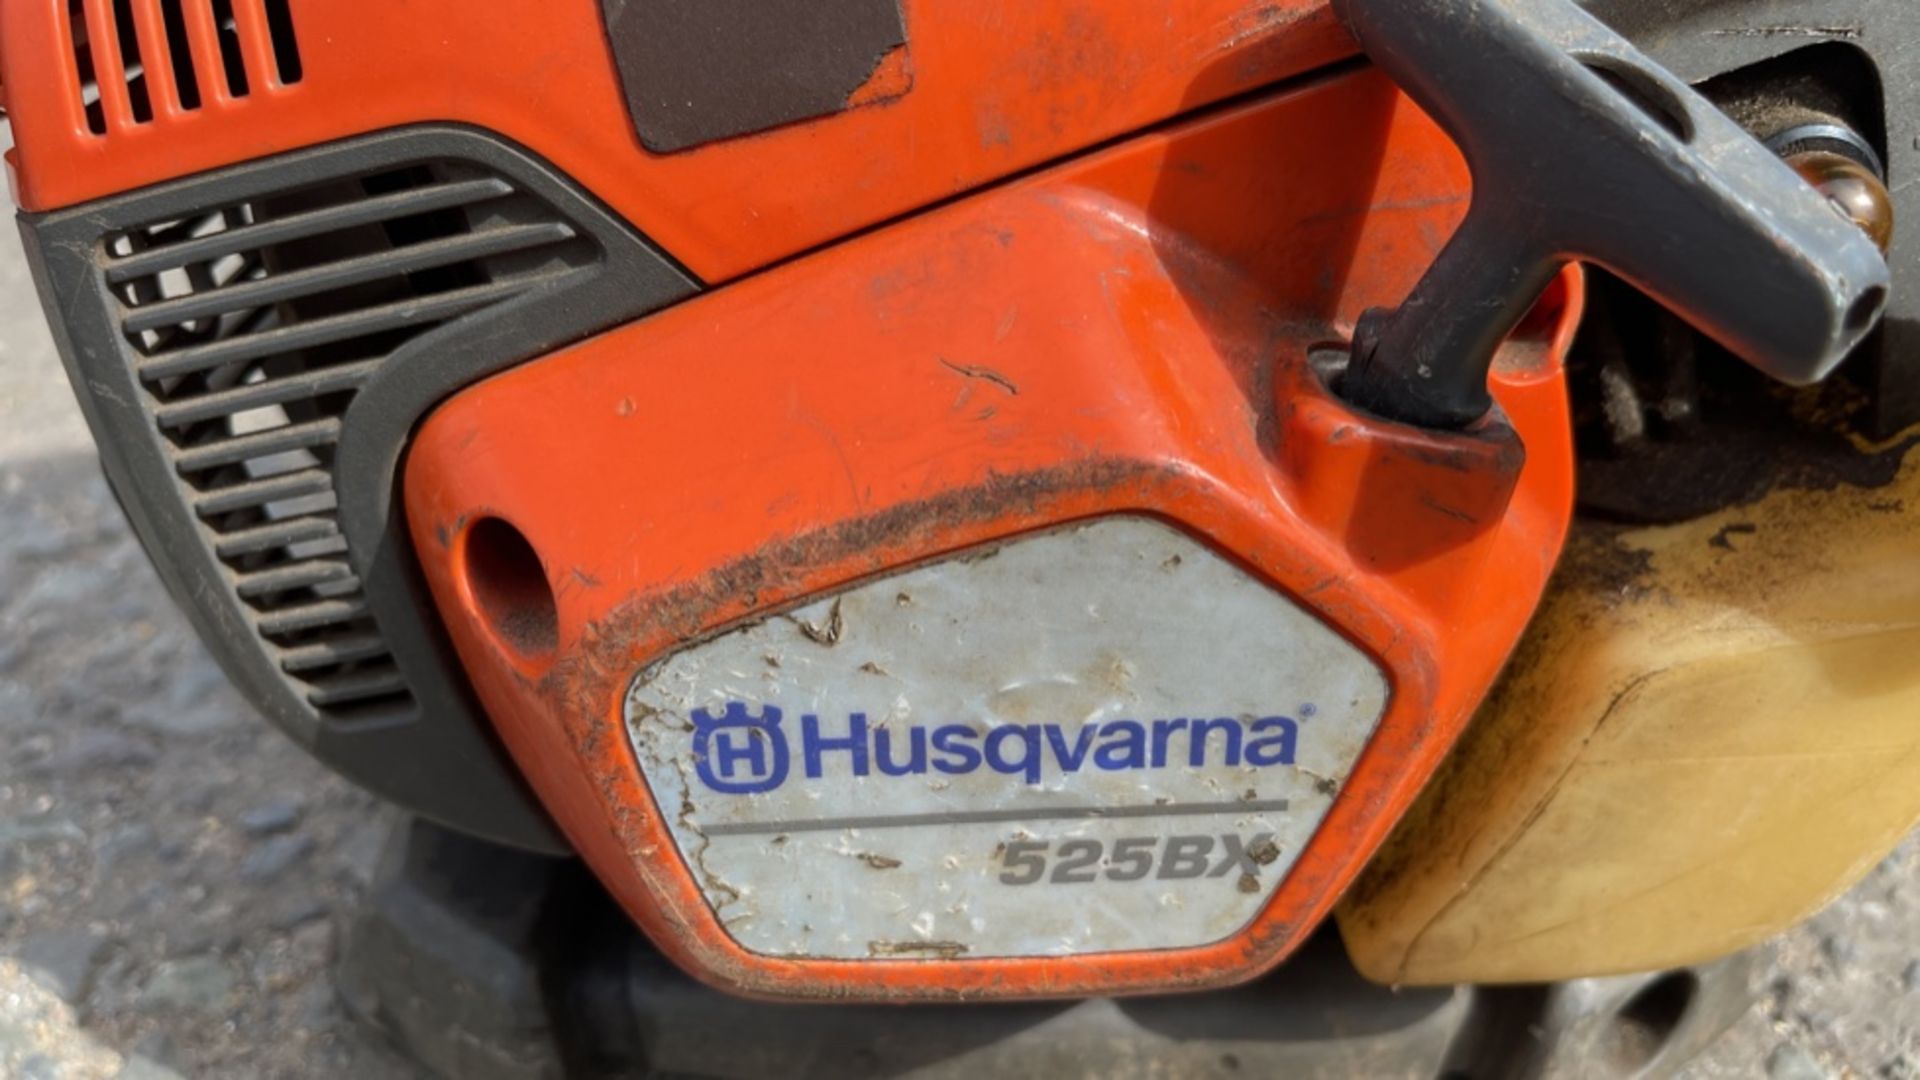 HUSQUARNA 525 BX PETROL LEAF BLOWER *NON-RUNNER - FOR SPARES OR REPAIR ONLY* - Image 3 of 6